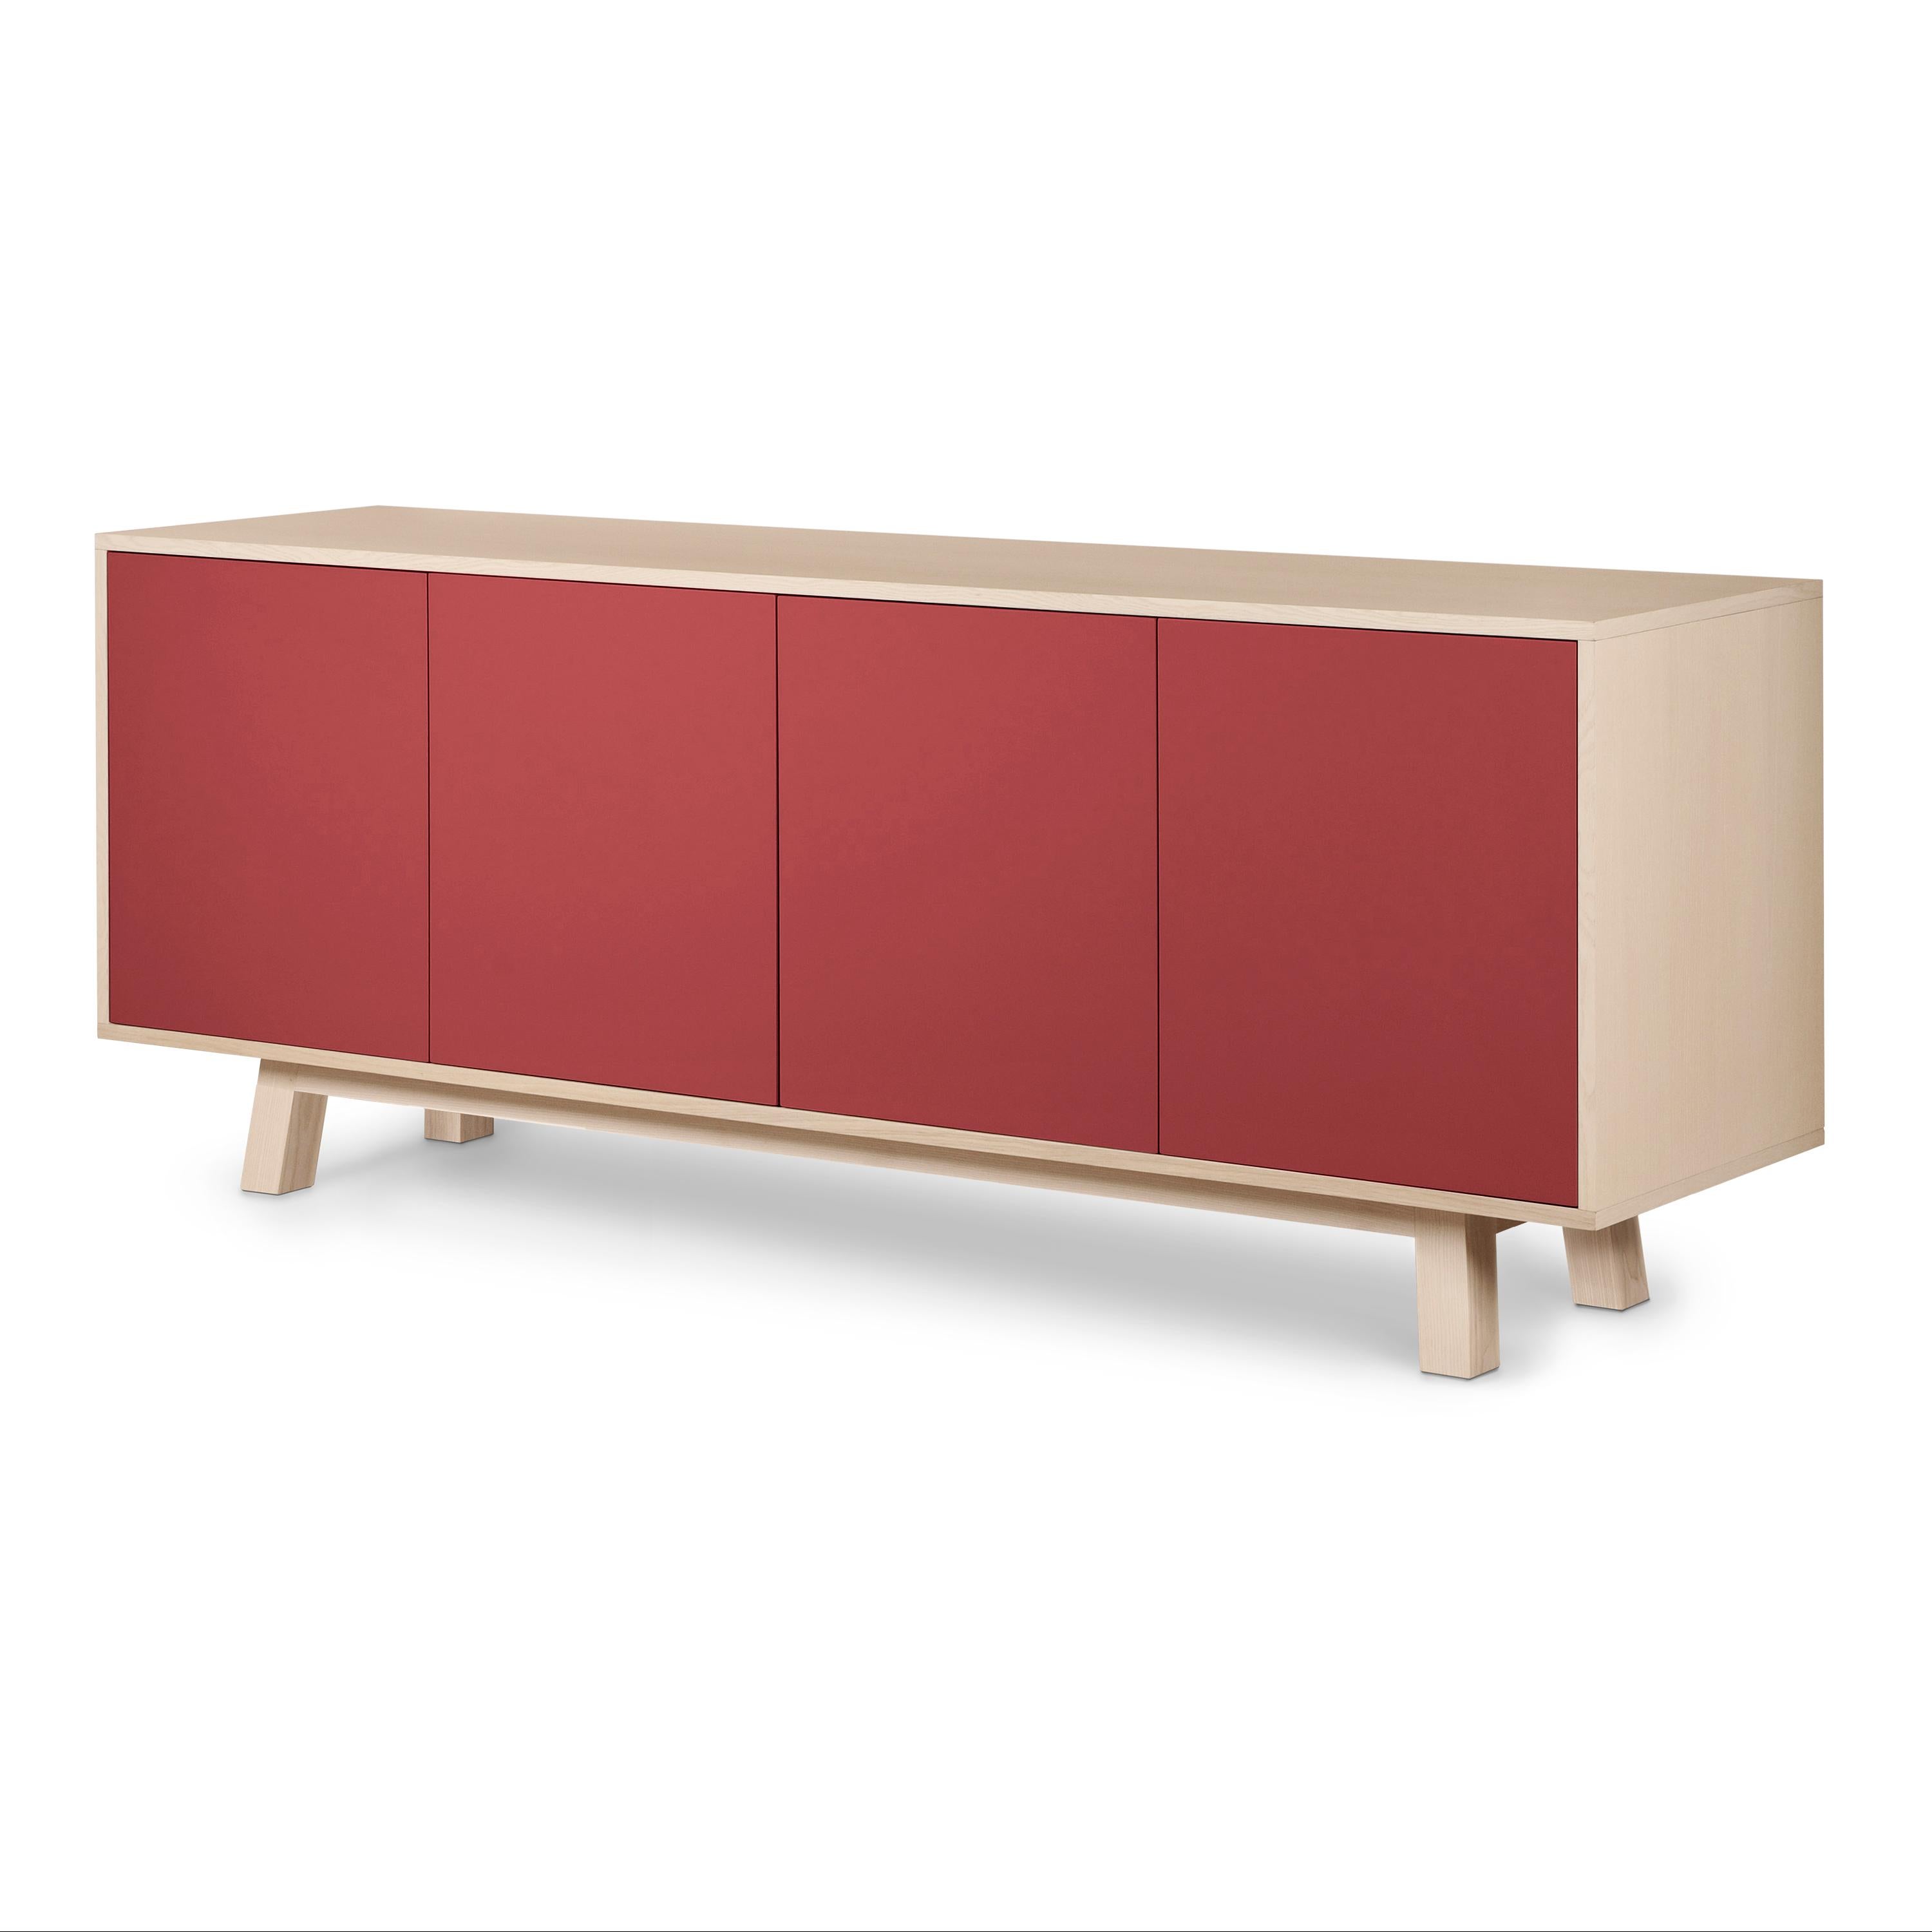 French Red 4-Door Low Sideboard in PEFC-Certified Ash Wood, Design Eric Gizard, Paris For Sale